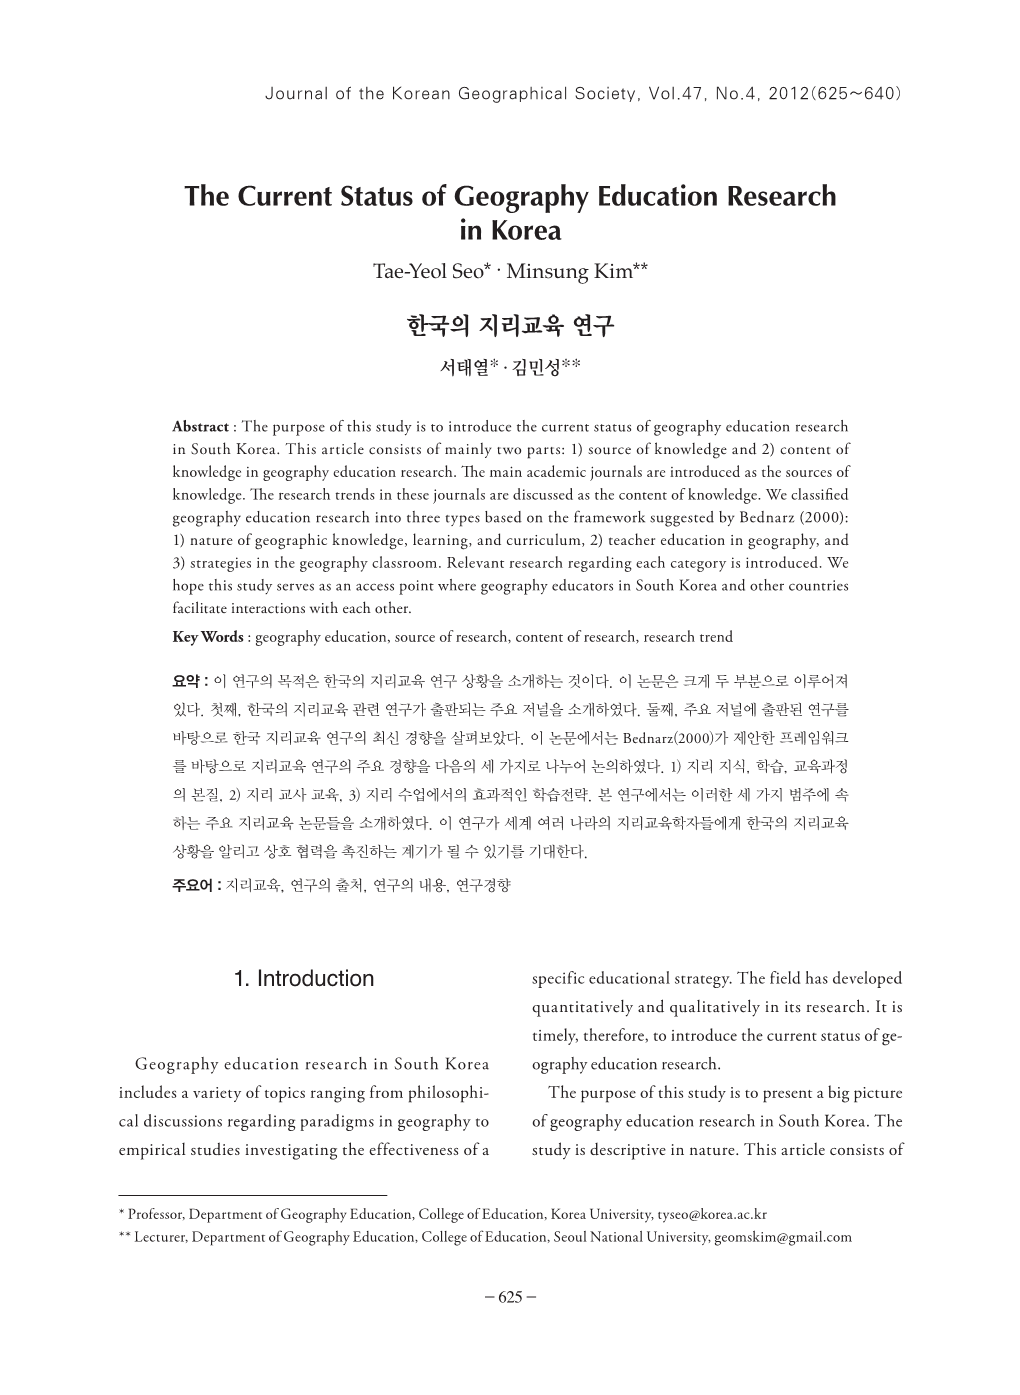 The Current Status of Geography Education Research in Korea Tae-Yeol Seo* ‧ Minsung Kim**